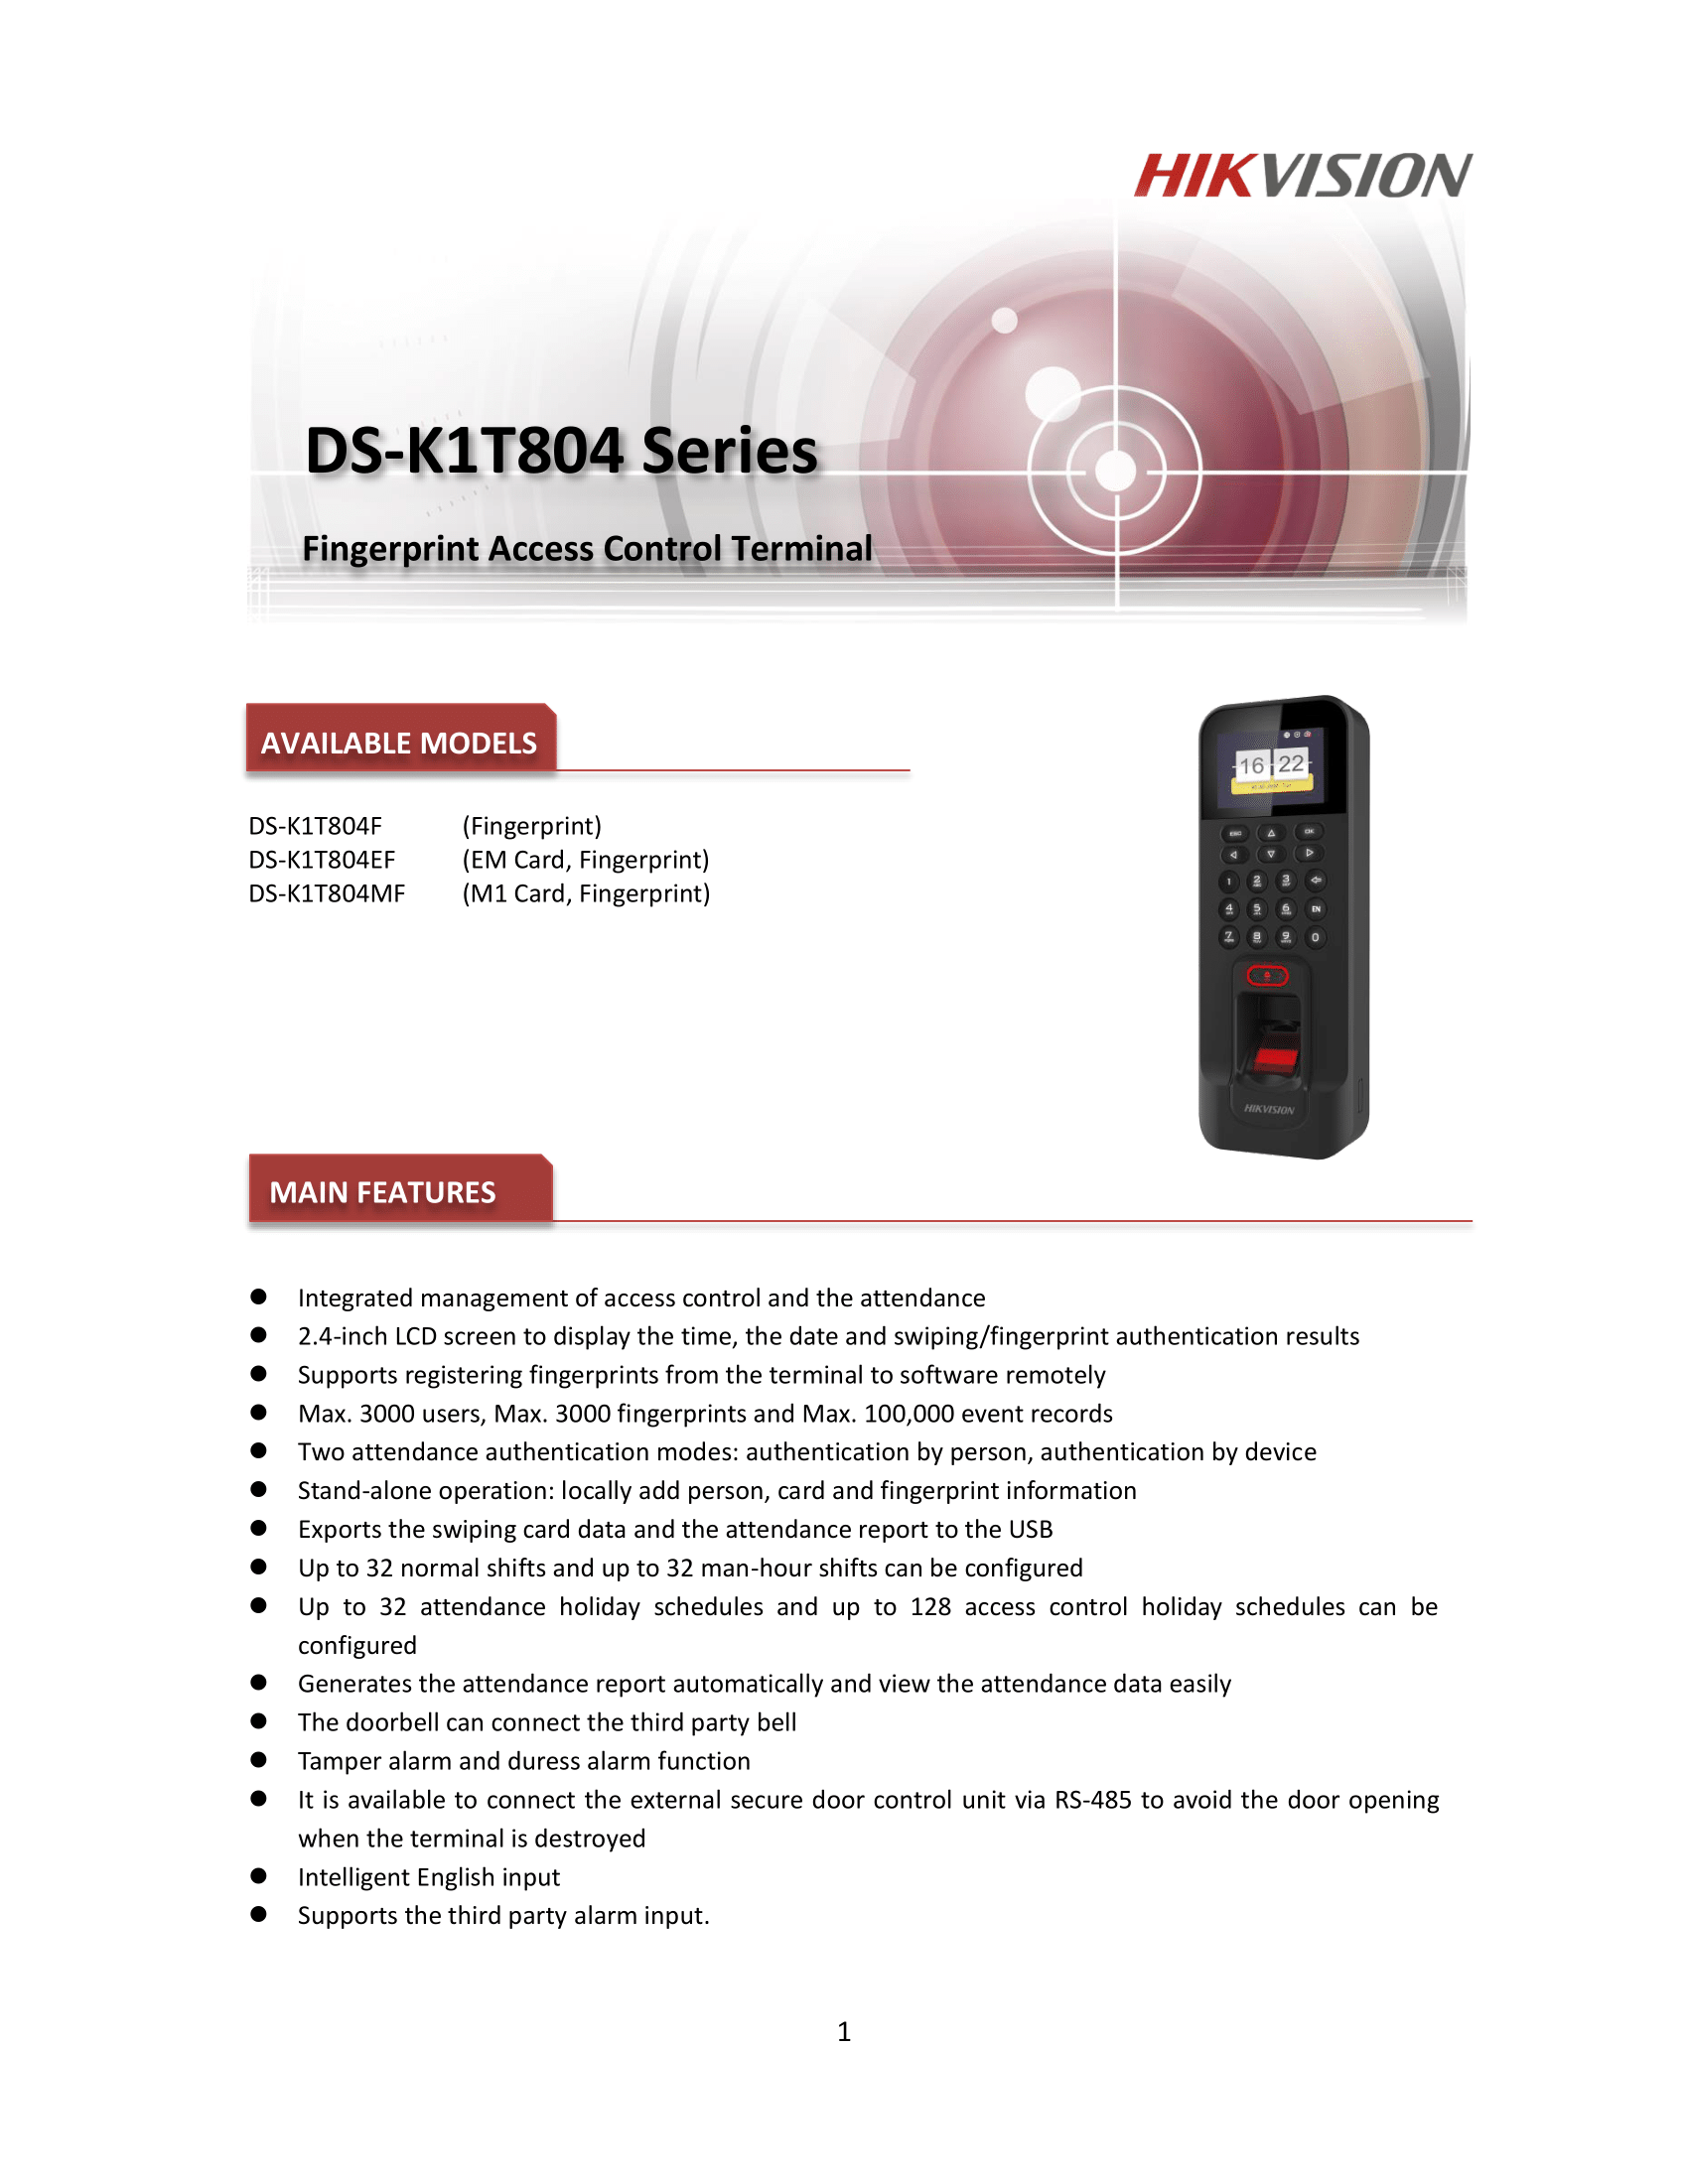 Hikvision DS-K1T804BMF Double Door Access Biometric Fingerprint Access INSTALLATION PACKAGE